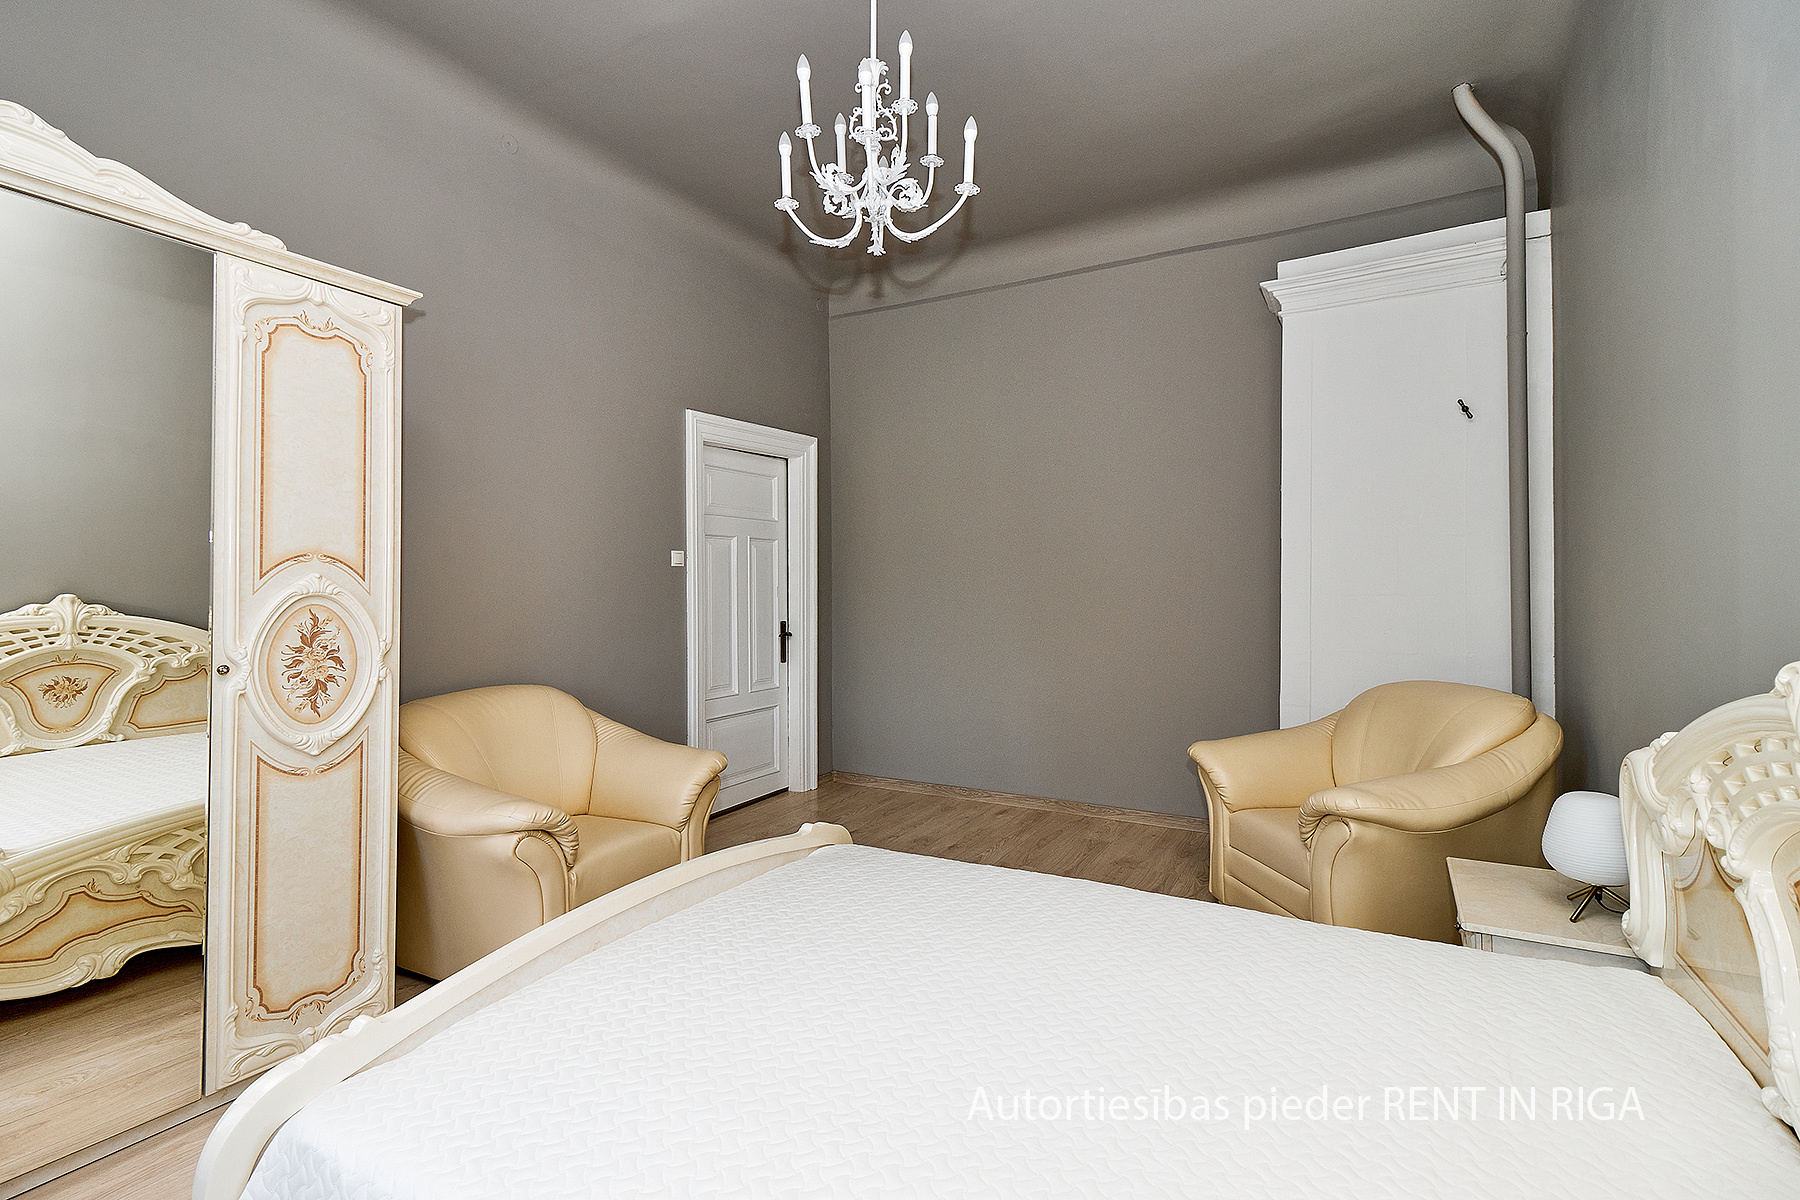 Apartment for rent, Ģertrūdes street 43 - Image 1